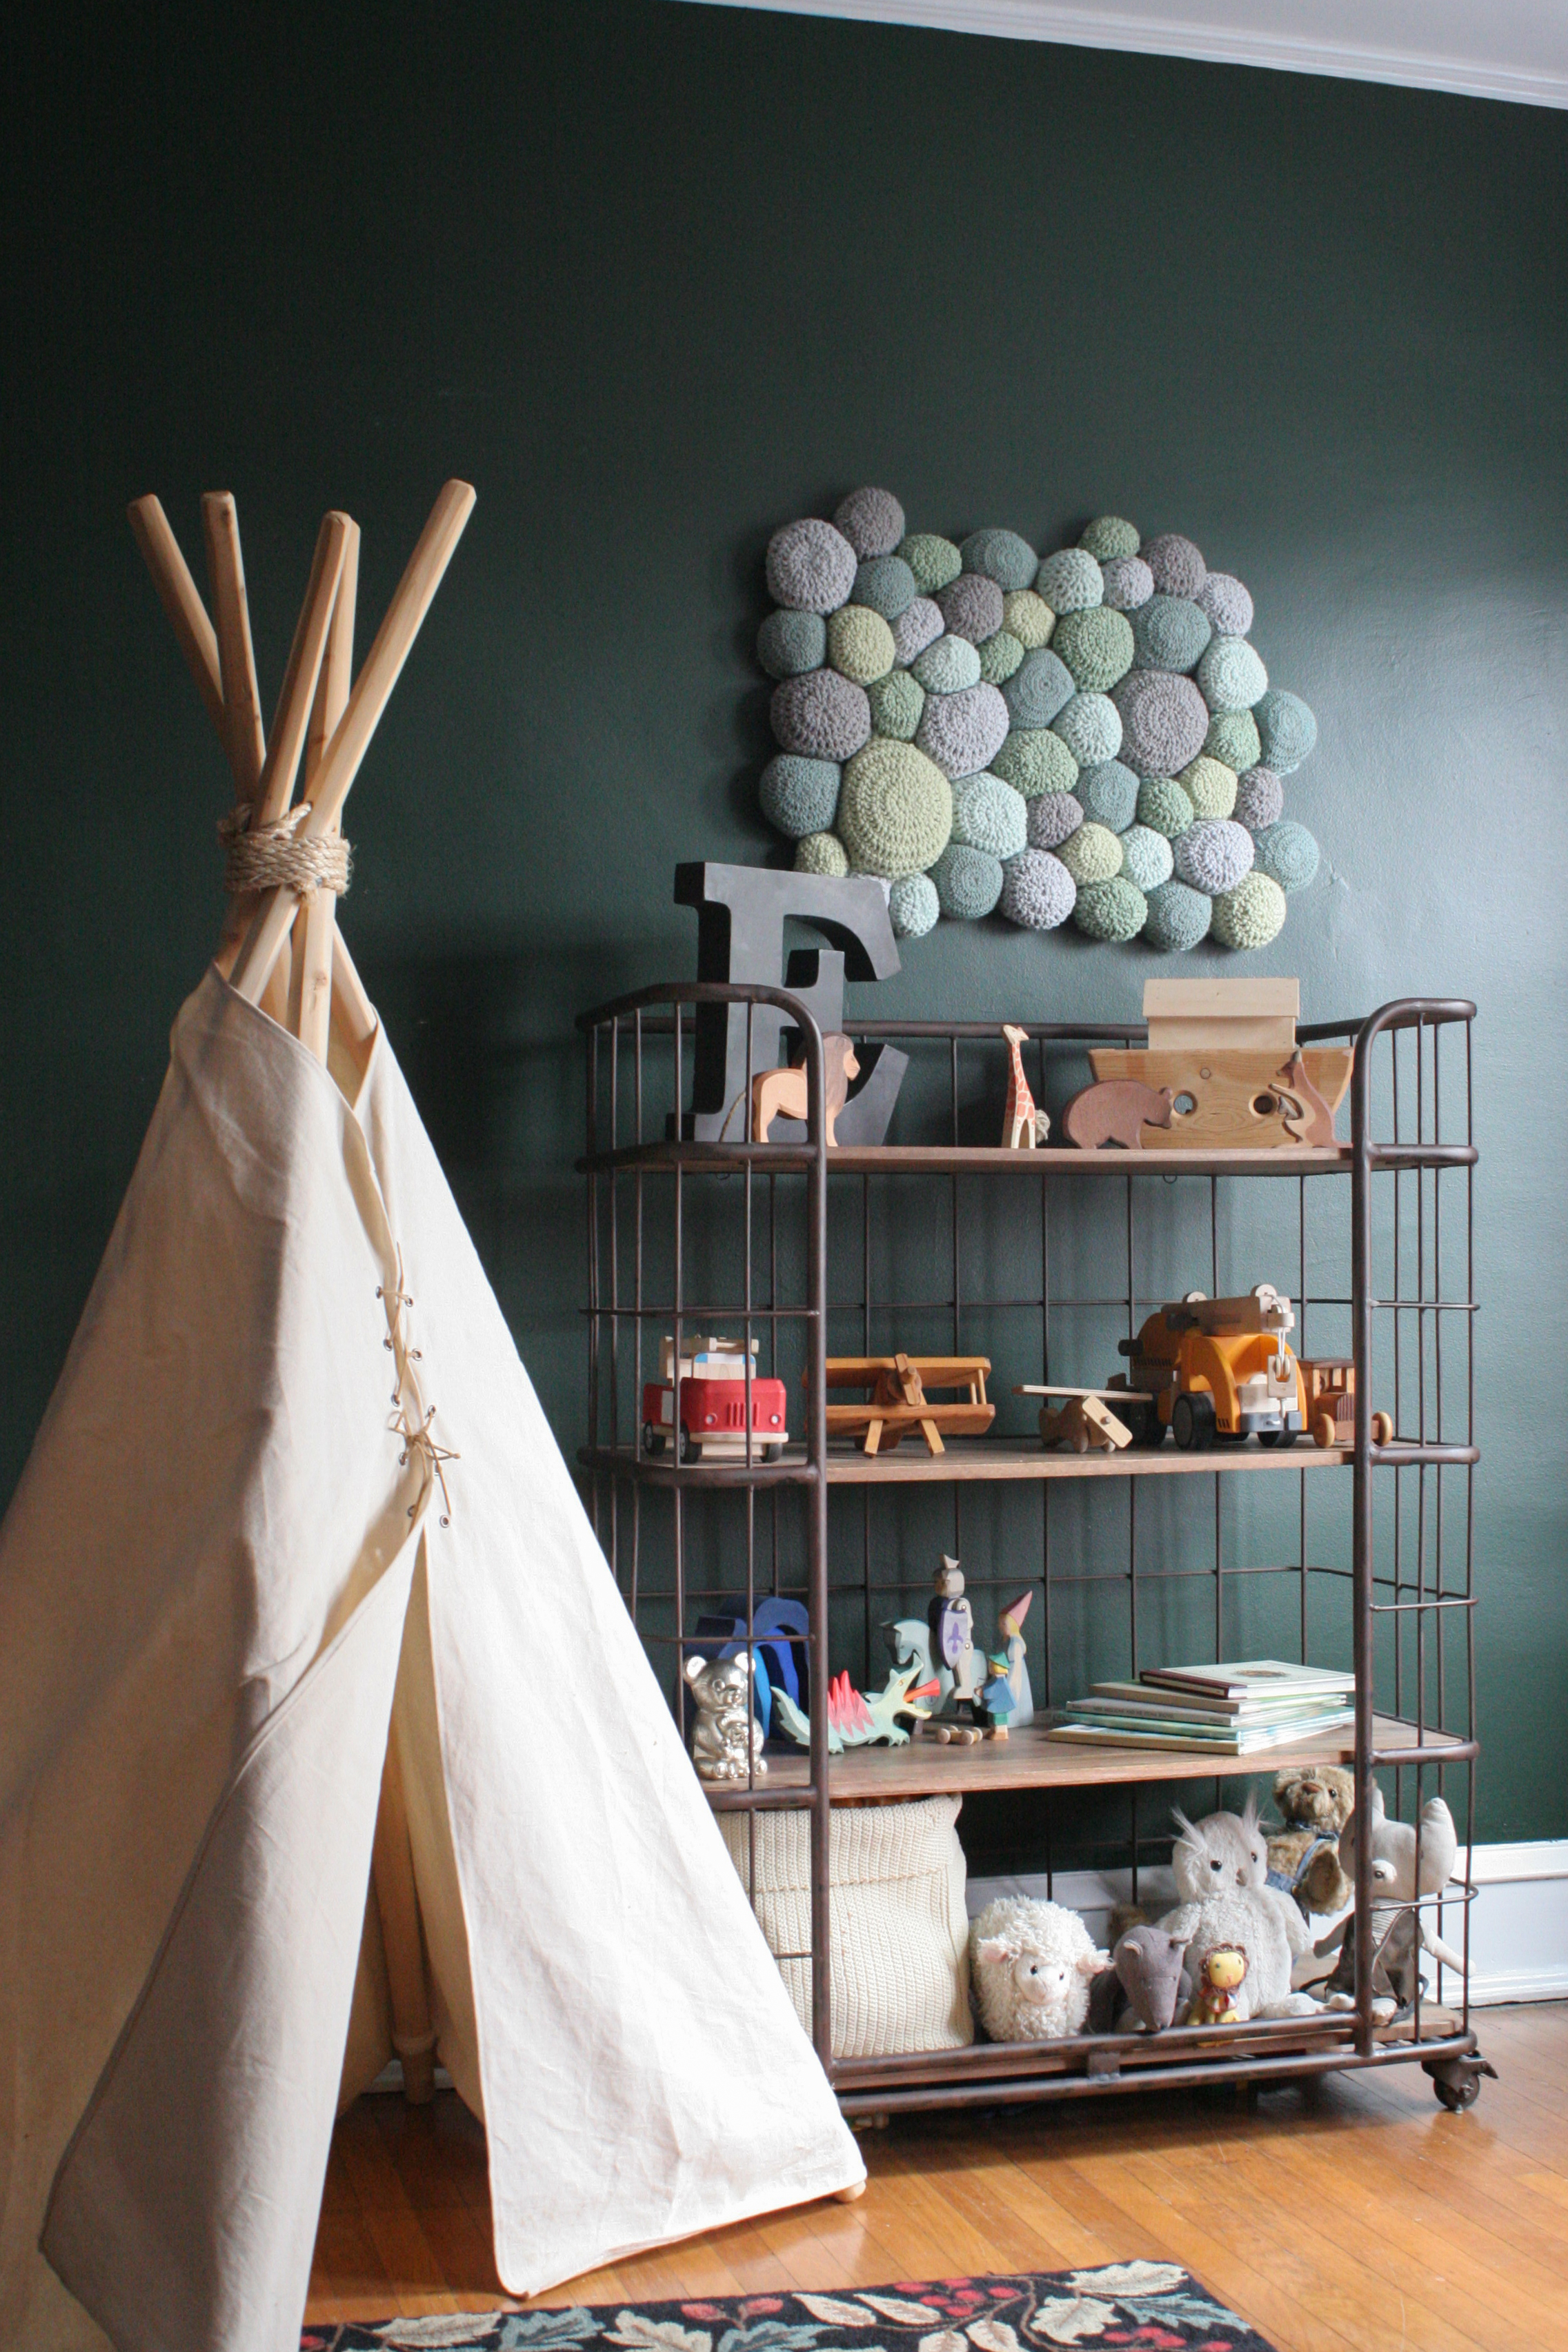 Sustainable Sheepskin as Wall Decor in Children's Room